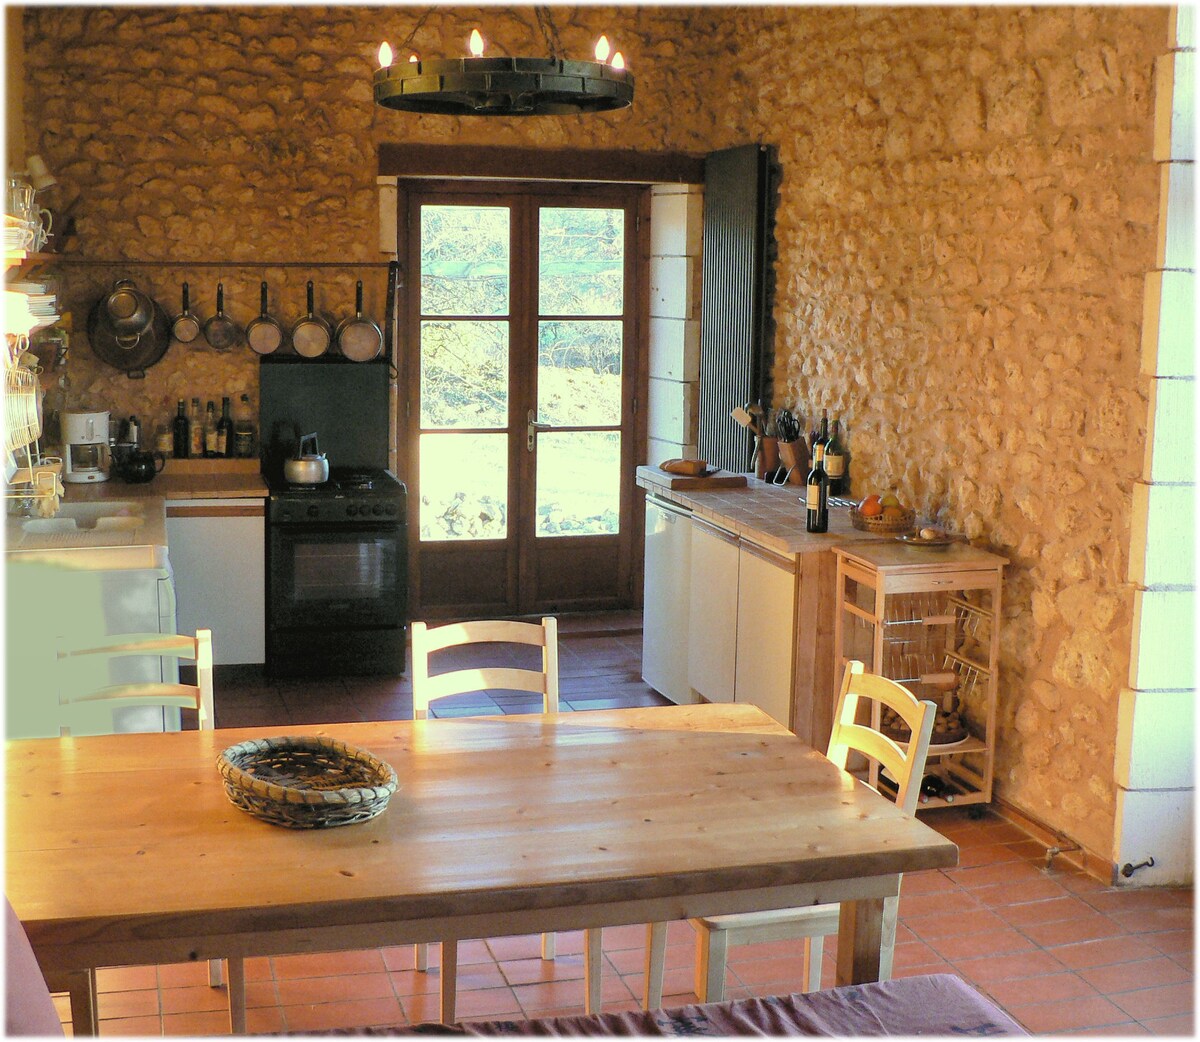 Les Vignasses - a stone barn in a superb location